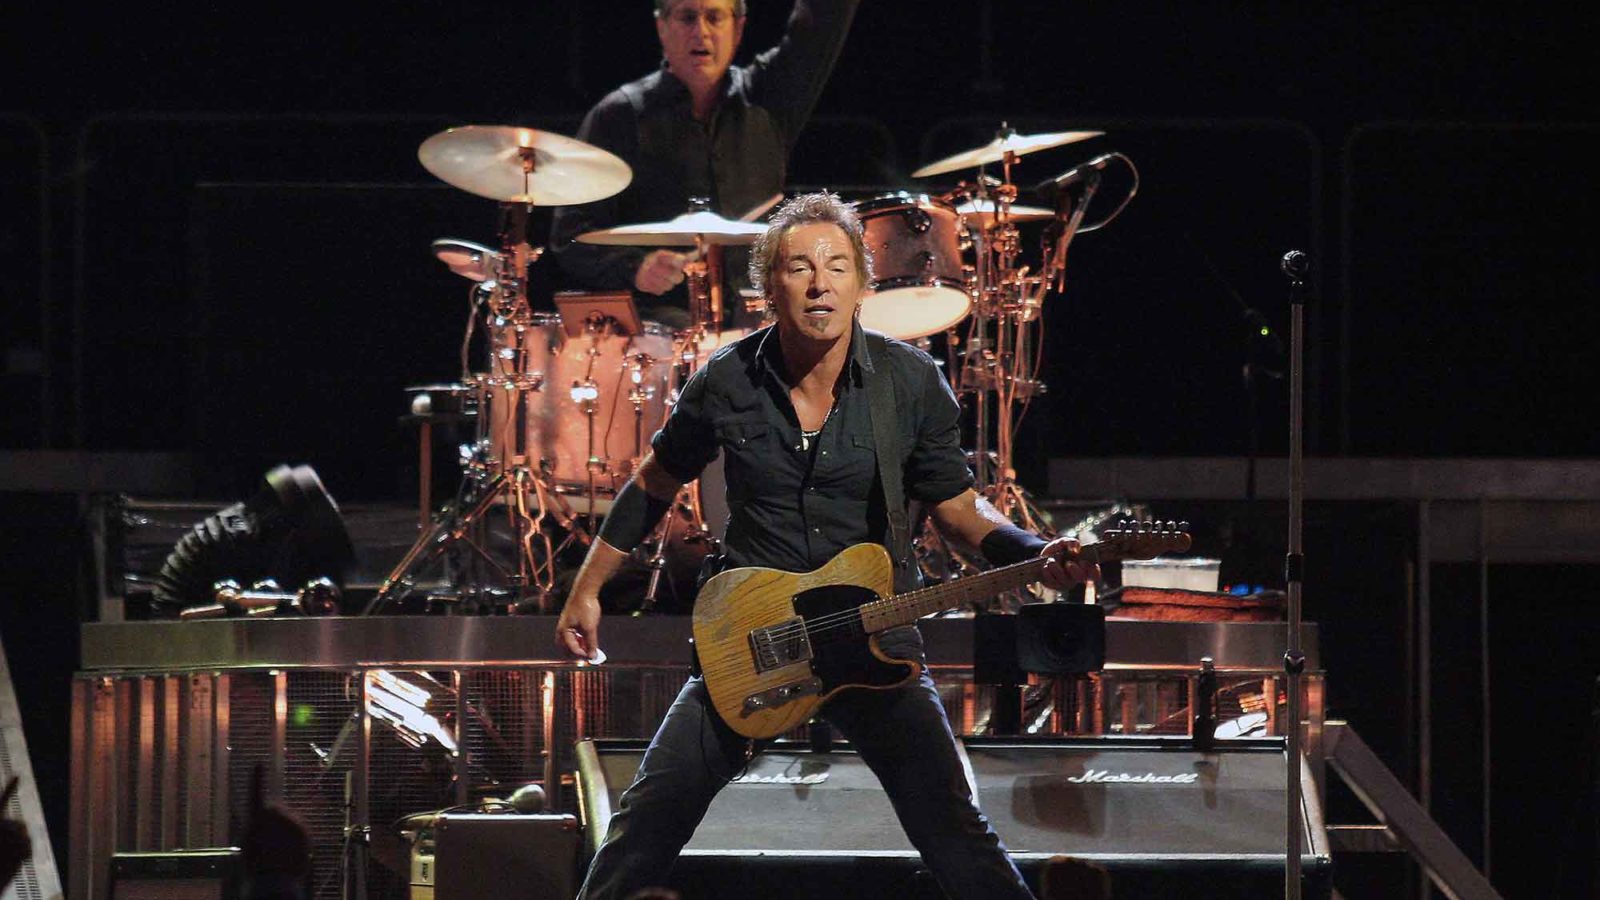 Video Of The Bruce Springsteen Super Bowl Halftime Show (2009)